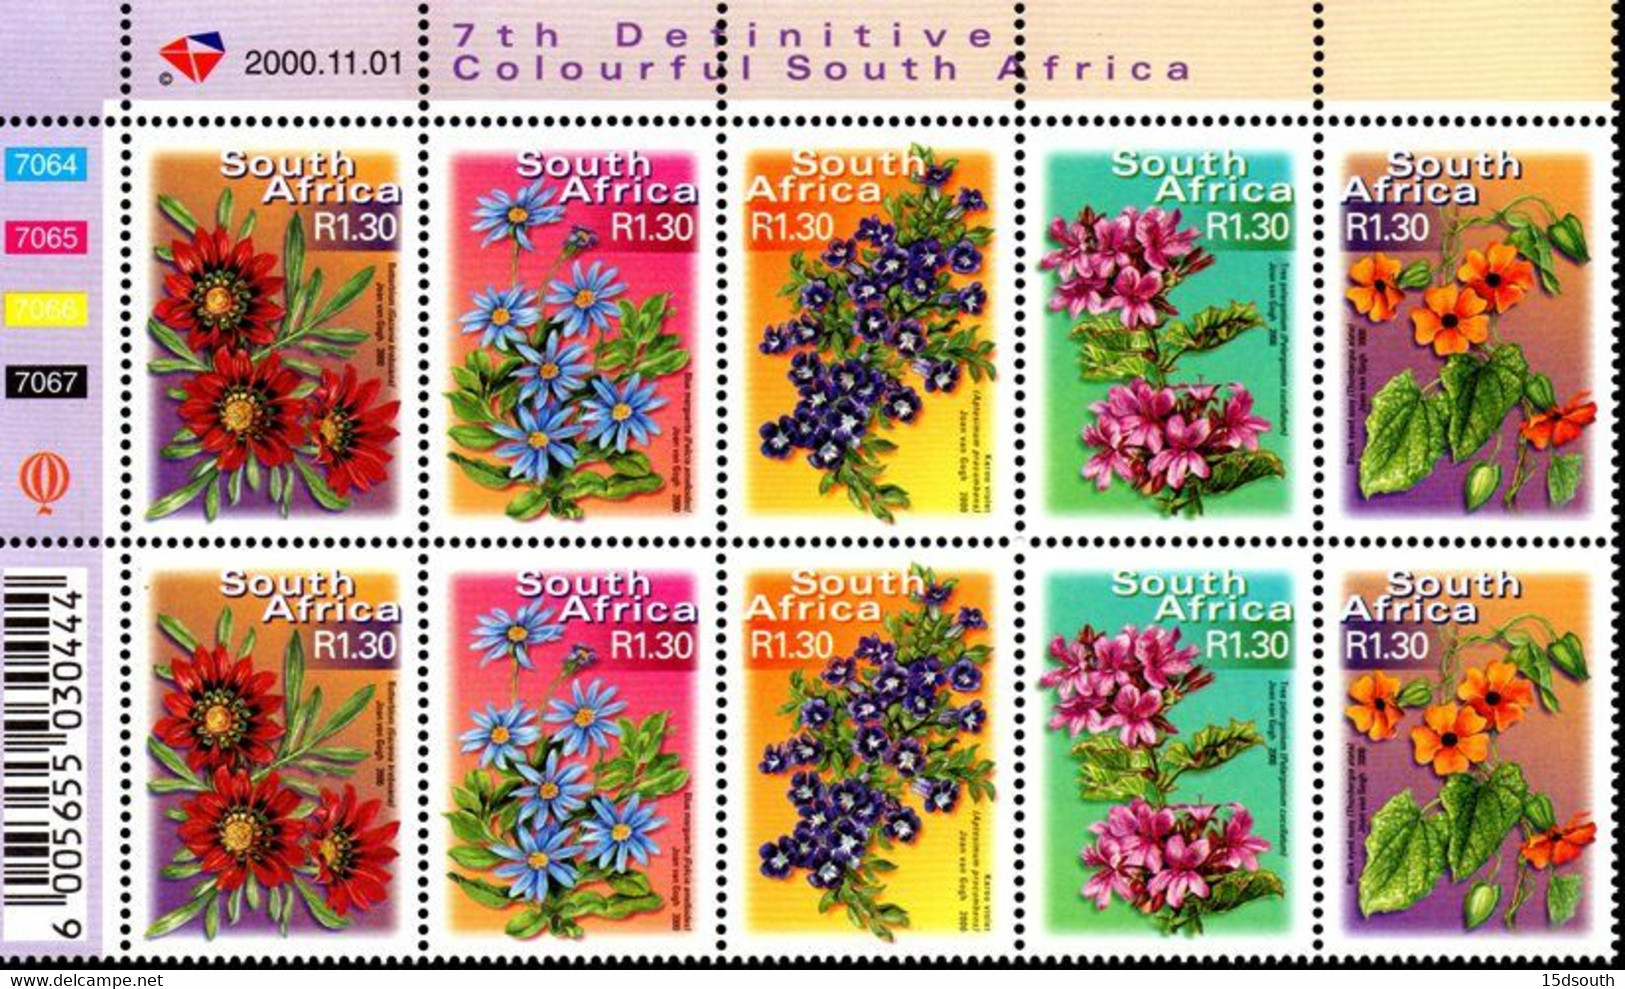 South Africa - 2000 7th Definitive Fauna And Flora R1.30 Extended Control Block (**) (2000.11.01) - Blocks & Sheetlets